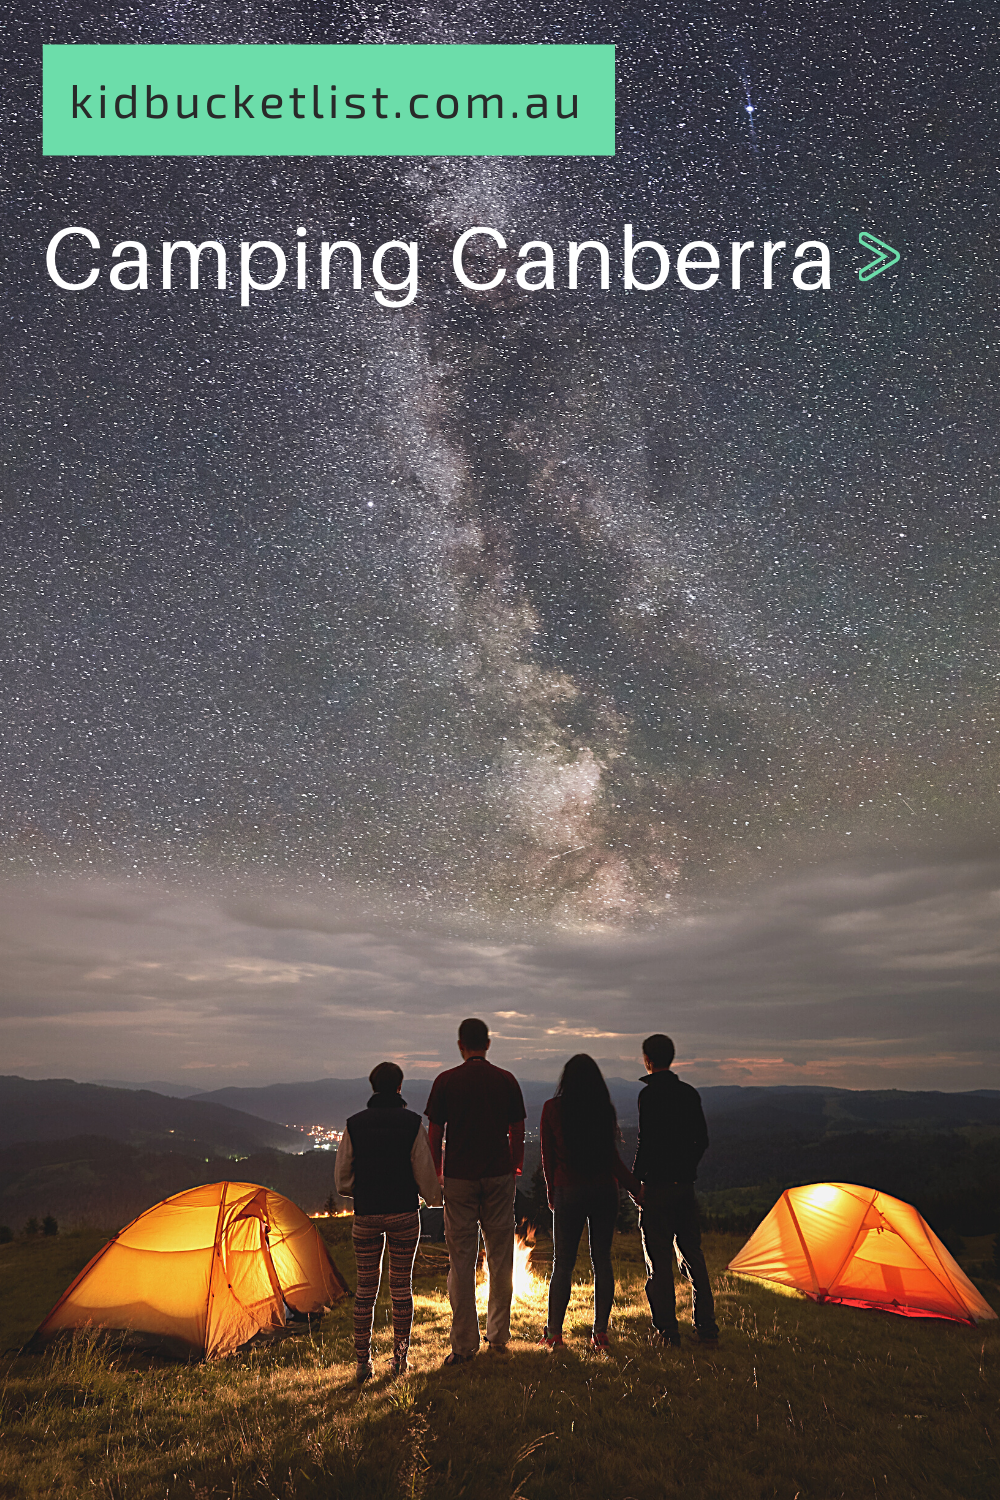 Camping Canberra Caravan Parks and Free Camps